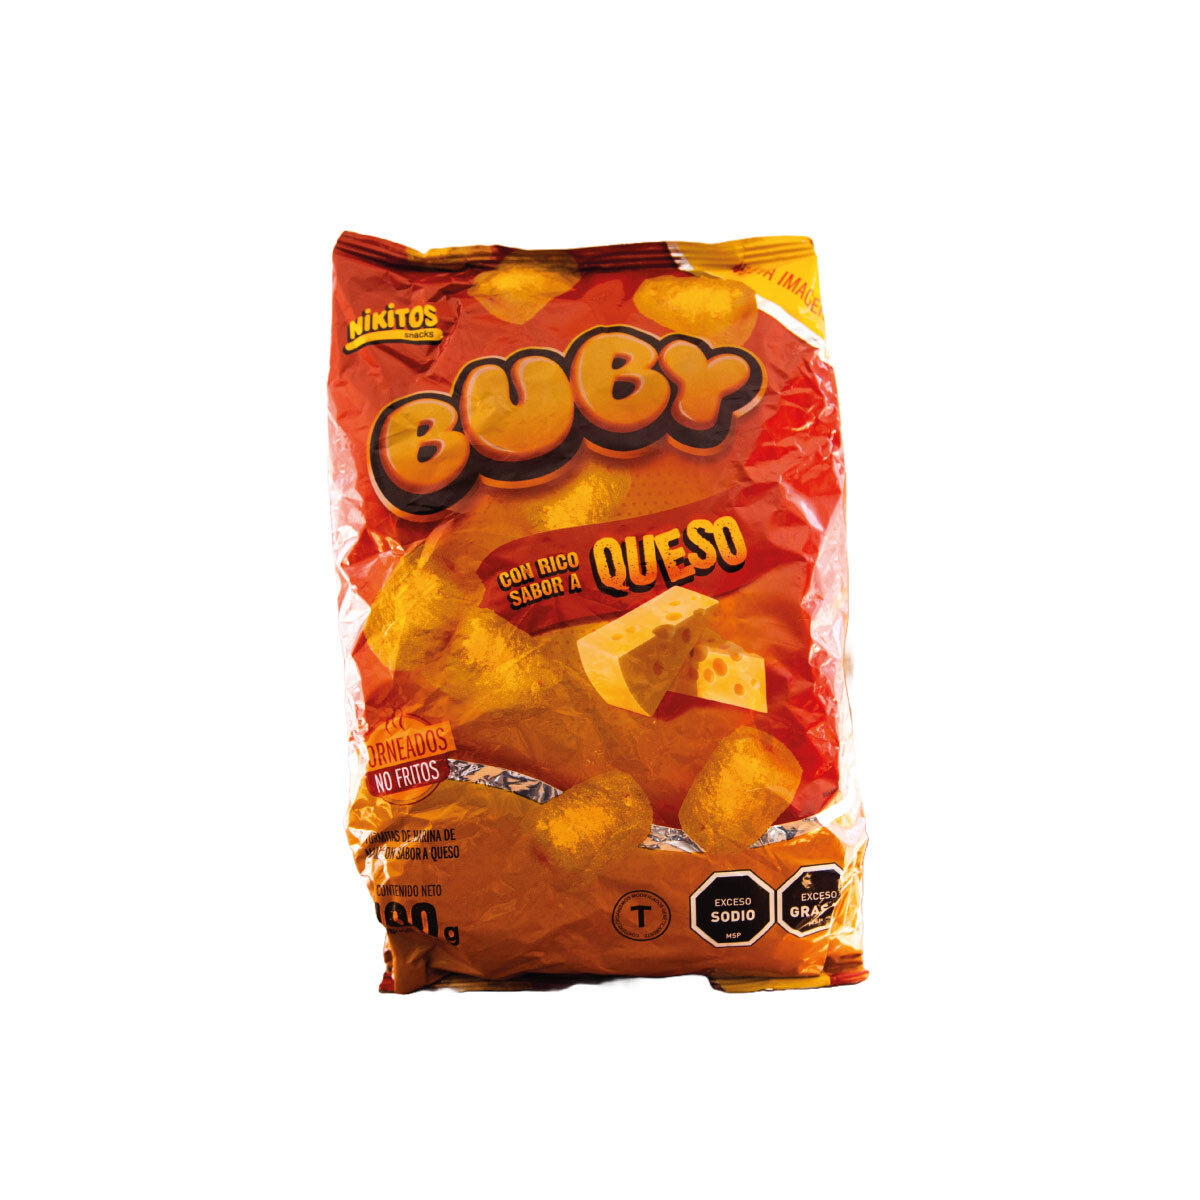 Snack Buby NIKITOS 100grs - Queso 